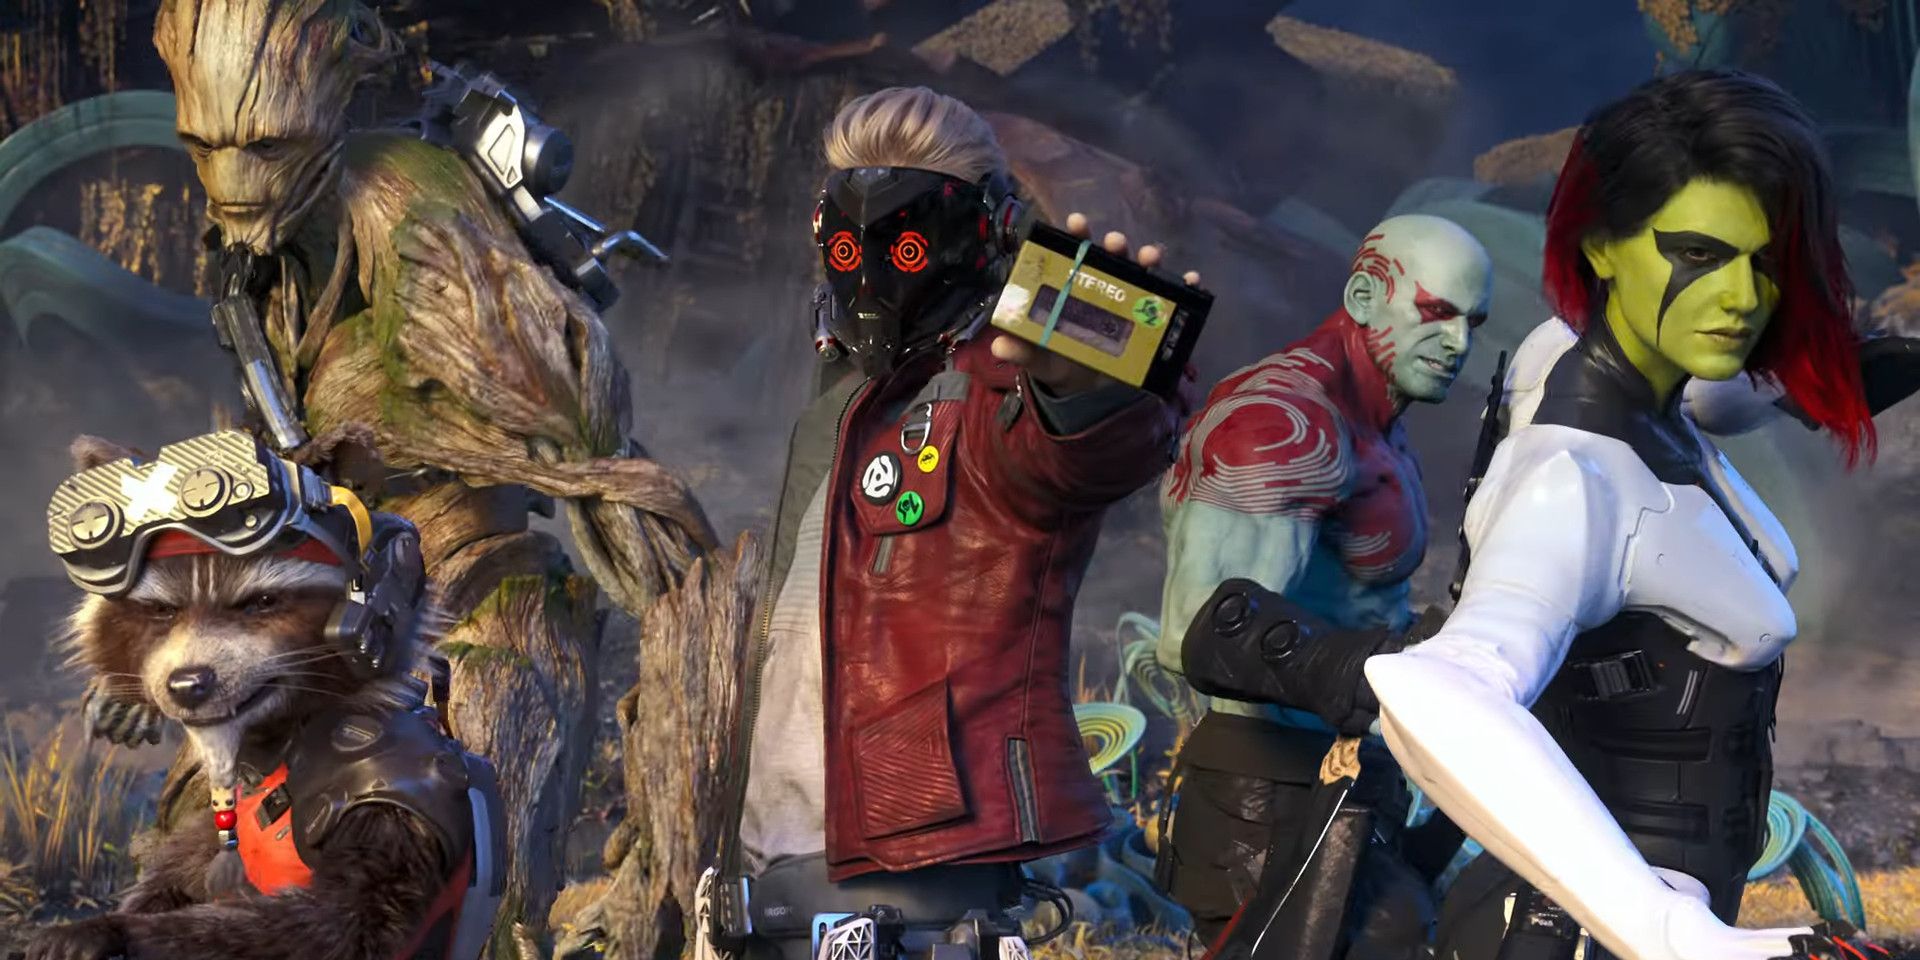 The team assemble in Marvel's Guardians Of The Galaxy